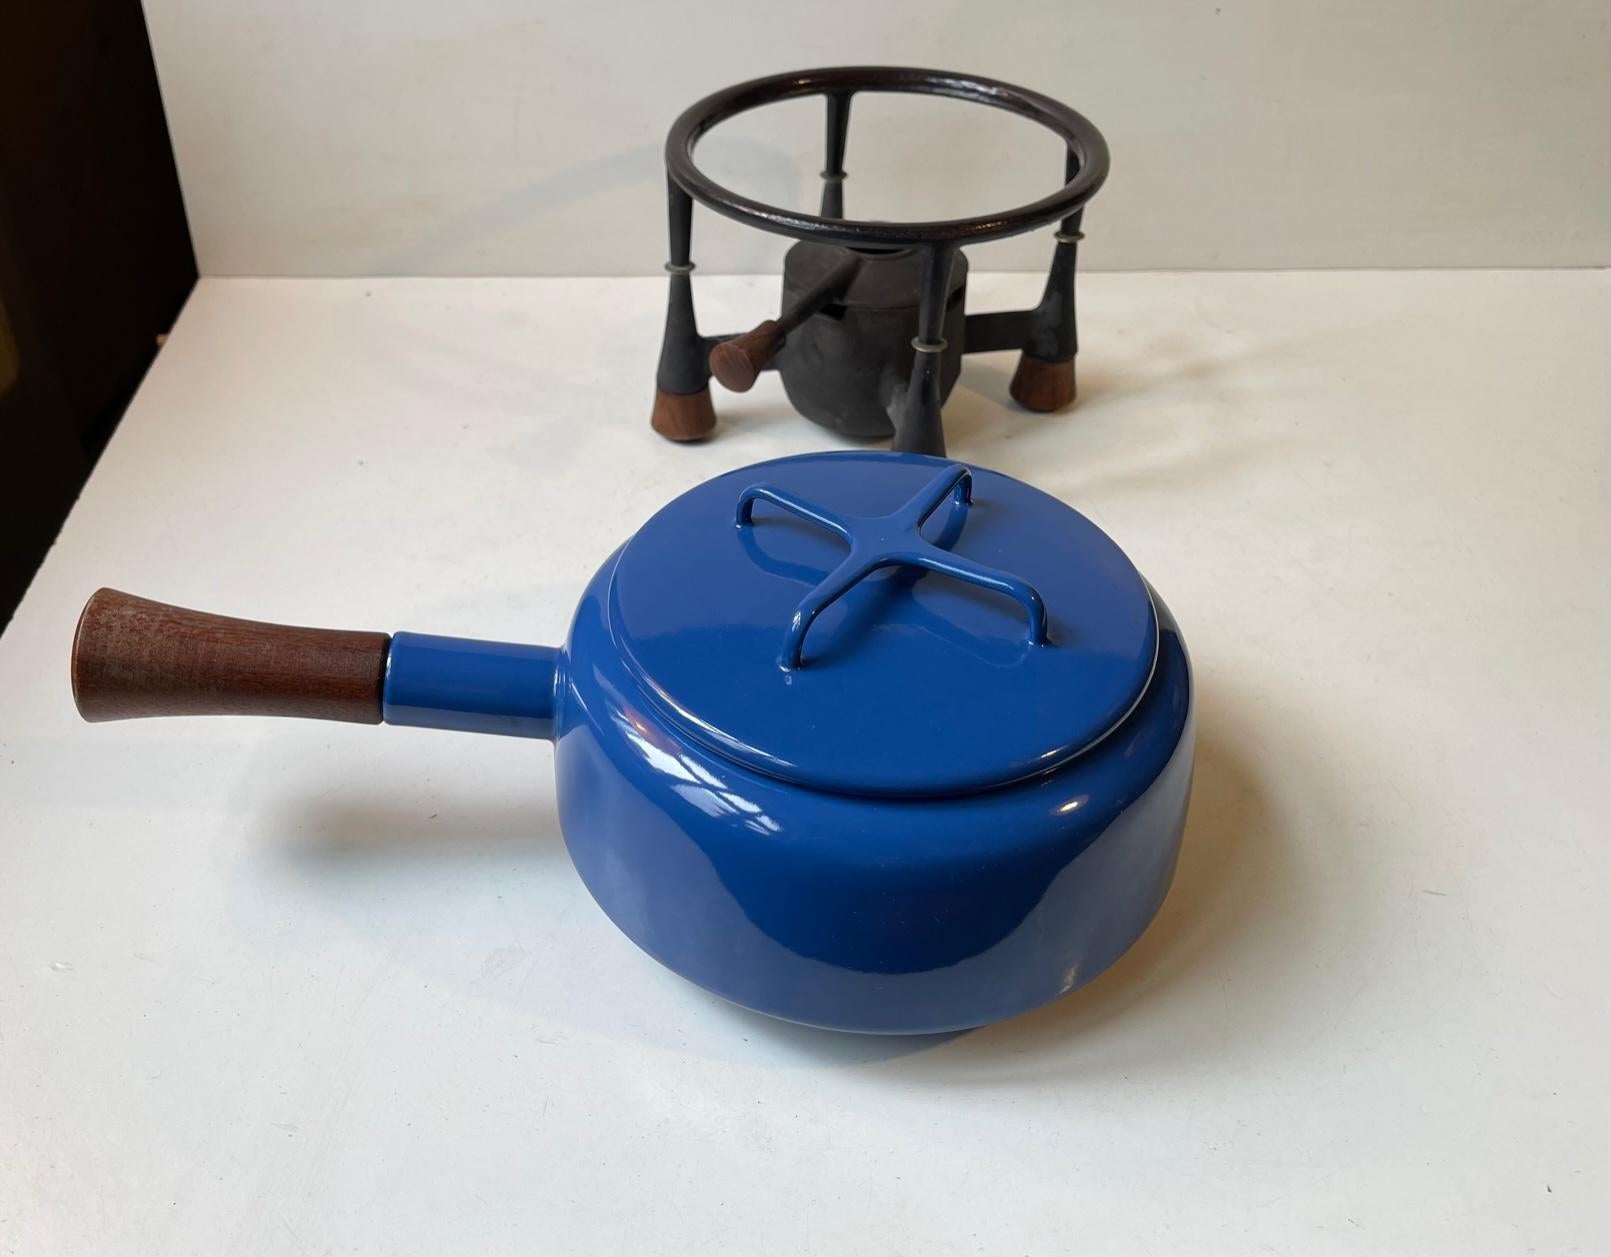 A very decorative and fully operational fondue set with Kobenstyle pot in blue and white enamel and stand/burner in cast iron with teak legs. The burner is to be used with regular cooking fuel or lamp oil. It was designed during the early 1960s by